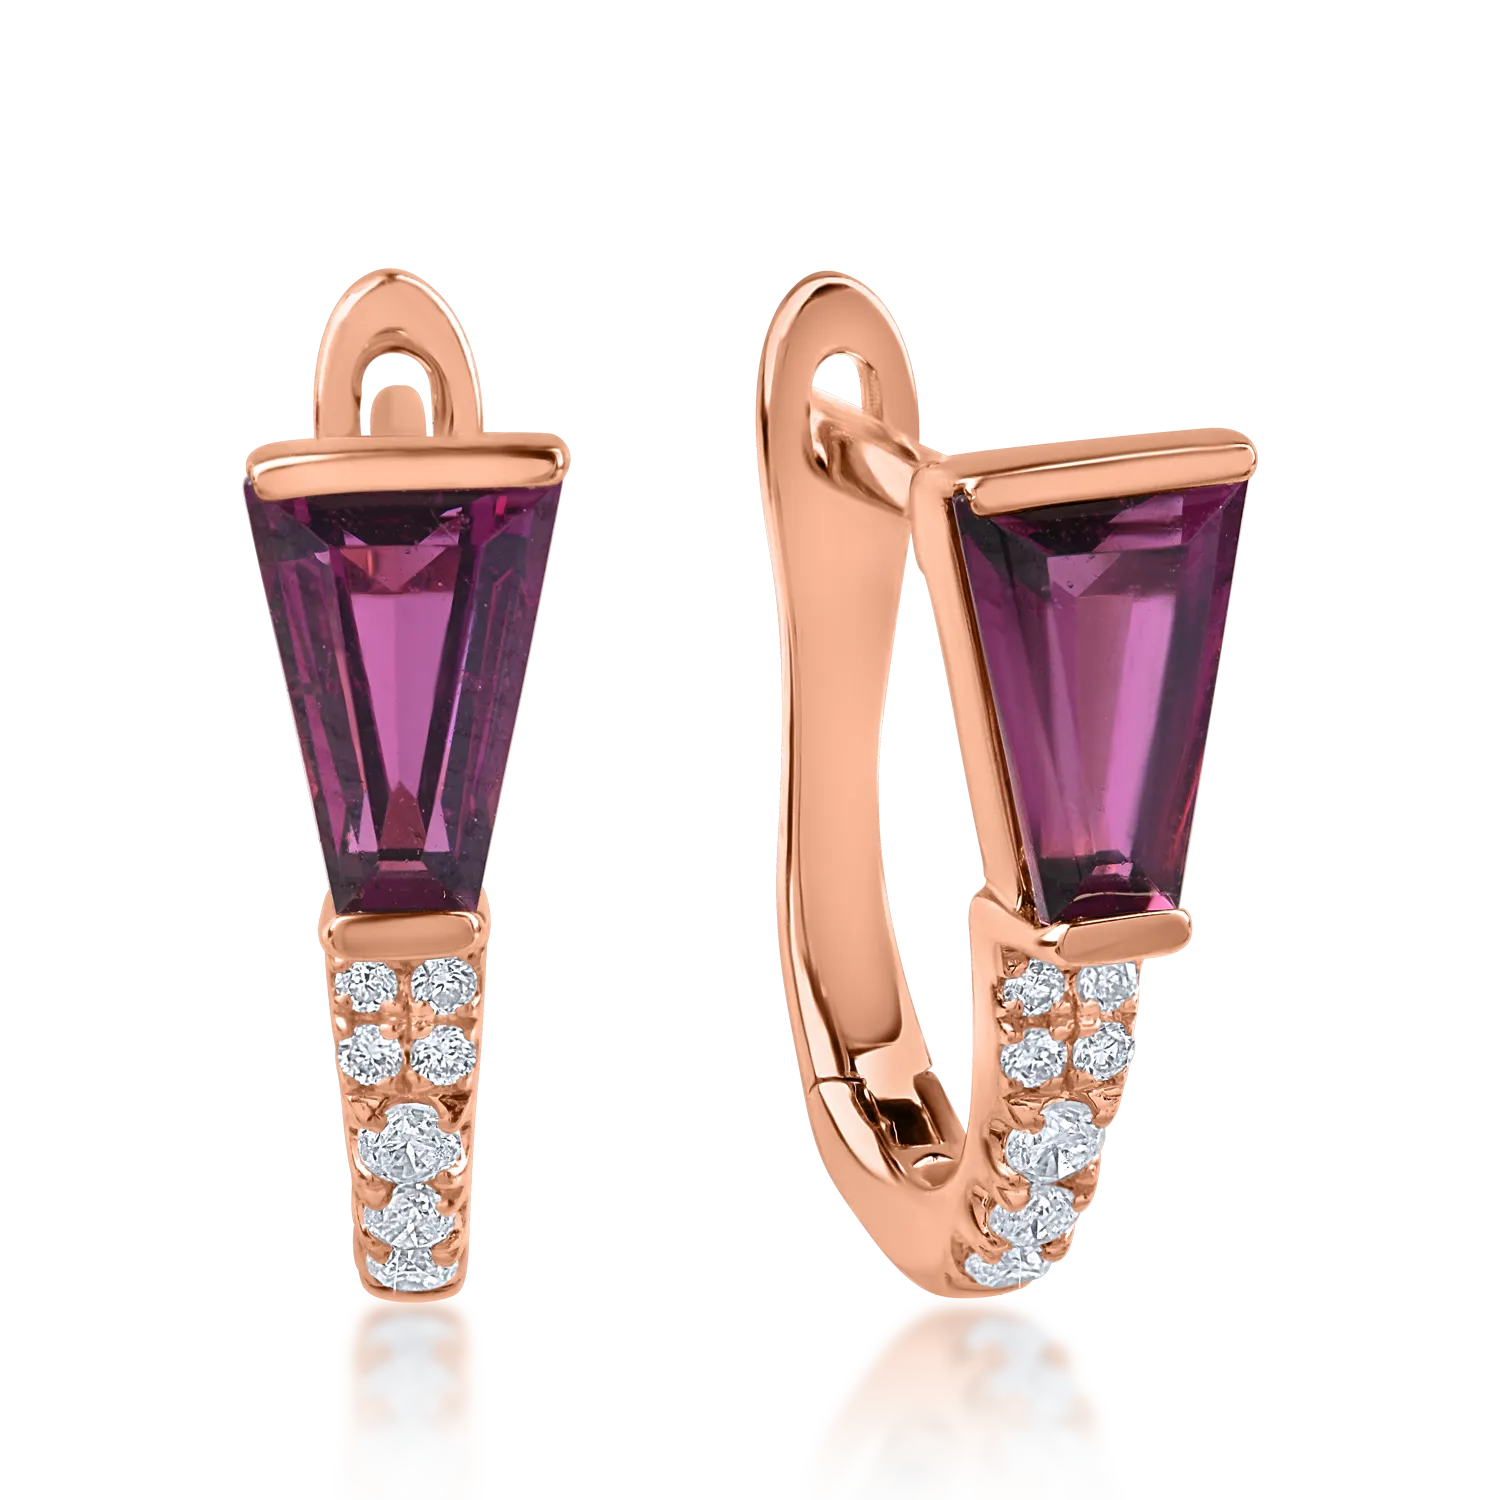 Rose gold earrings with 1.18ct rhodolites garnet and 0.09ct diamonds